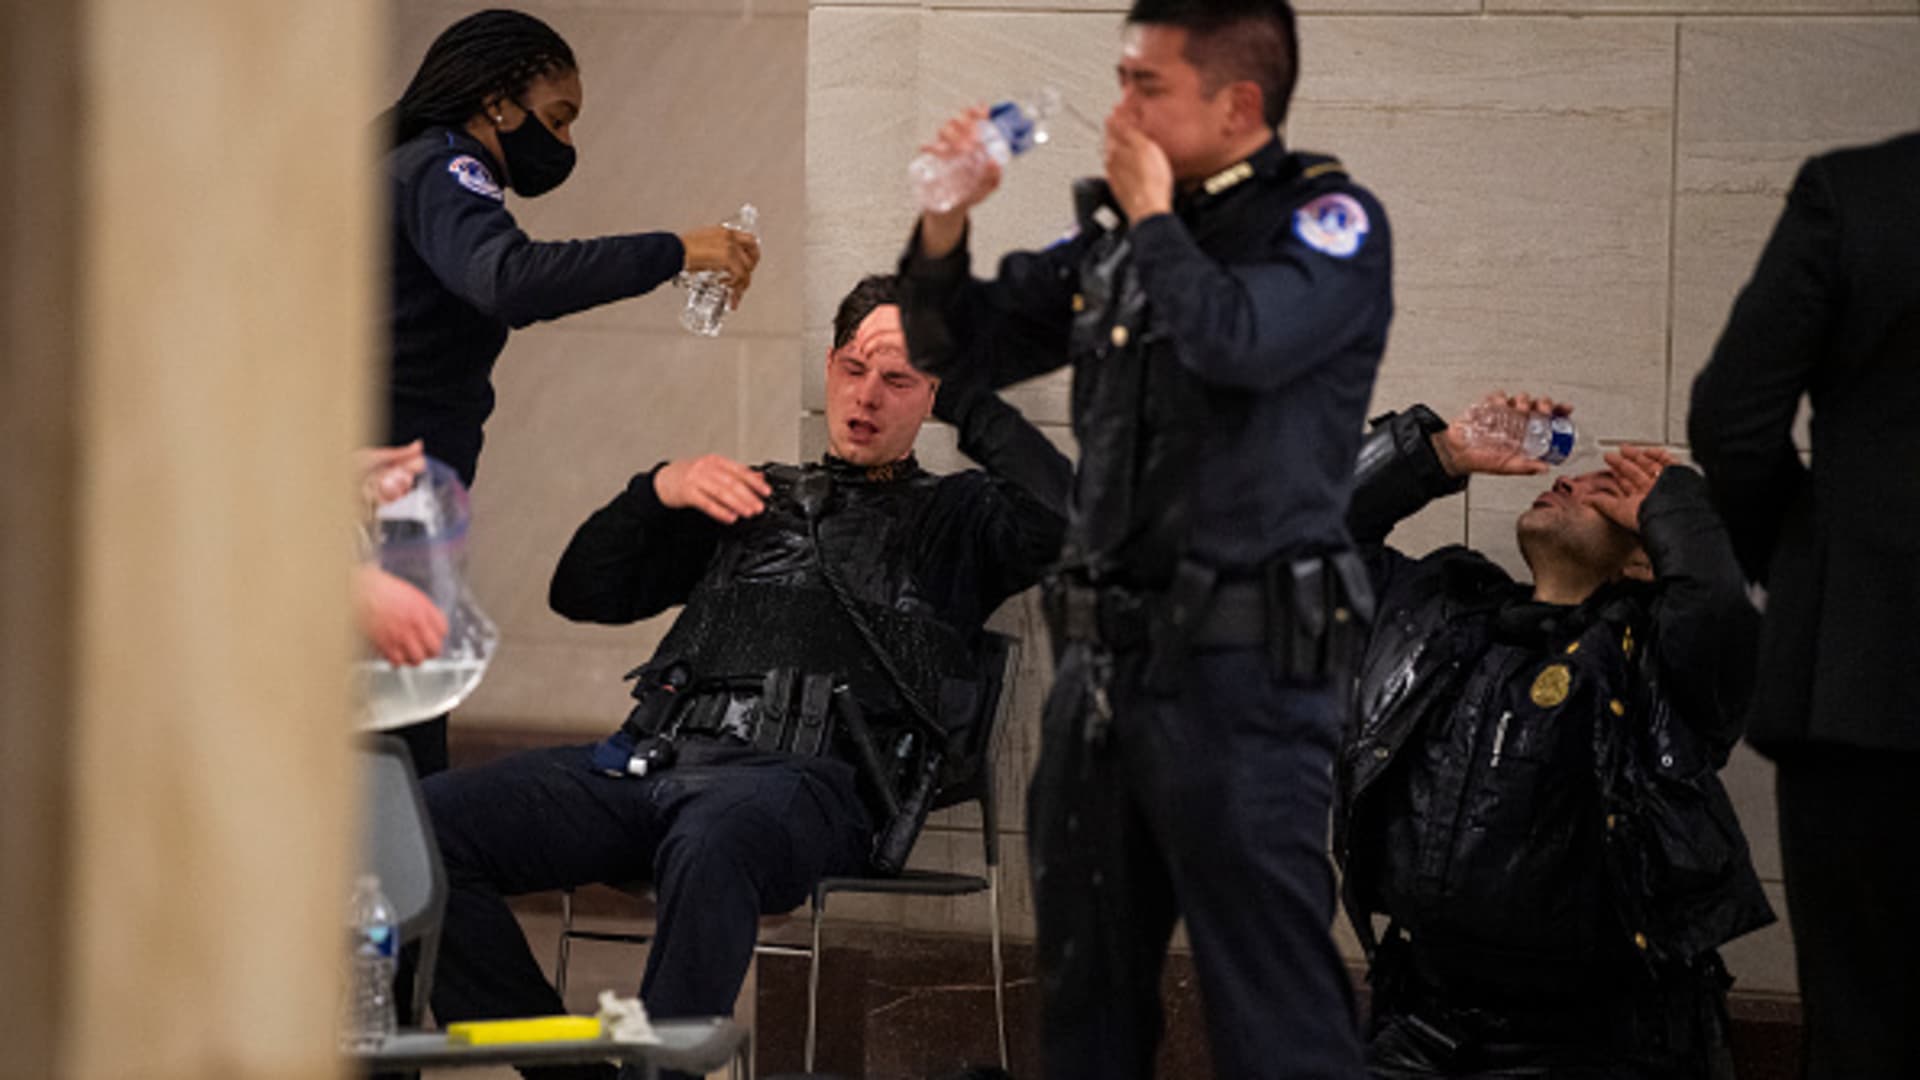 Capitol Police officers receive medical treatment after clashes with protesters attempting to disrupt the joint session of Congress to certify the Electoral College vote on Wednesday, January 6, 2021.